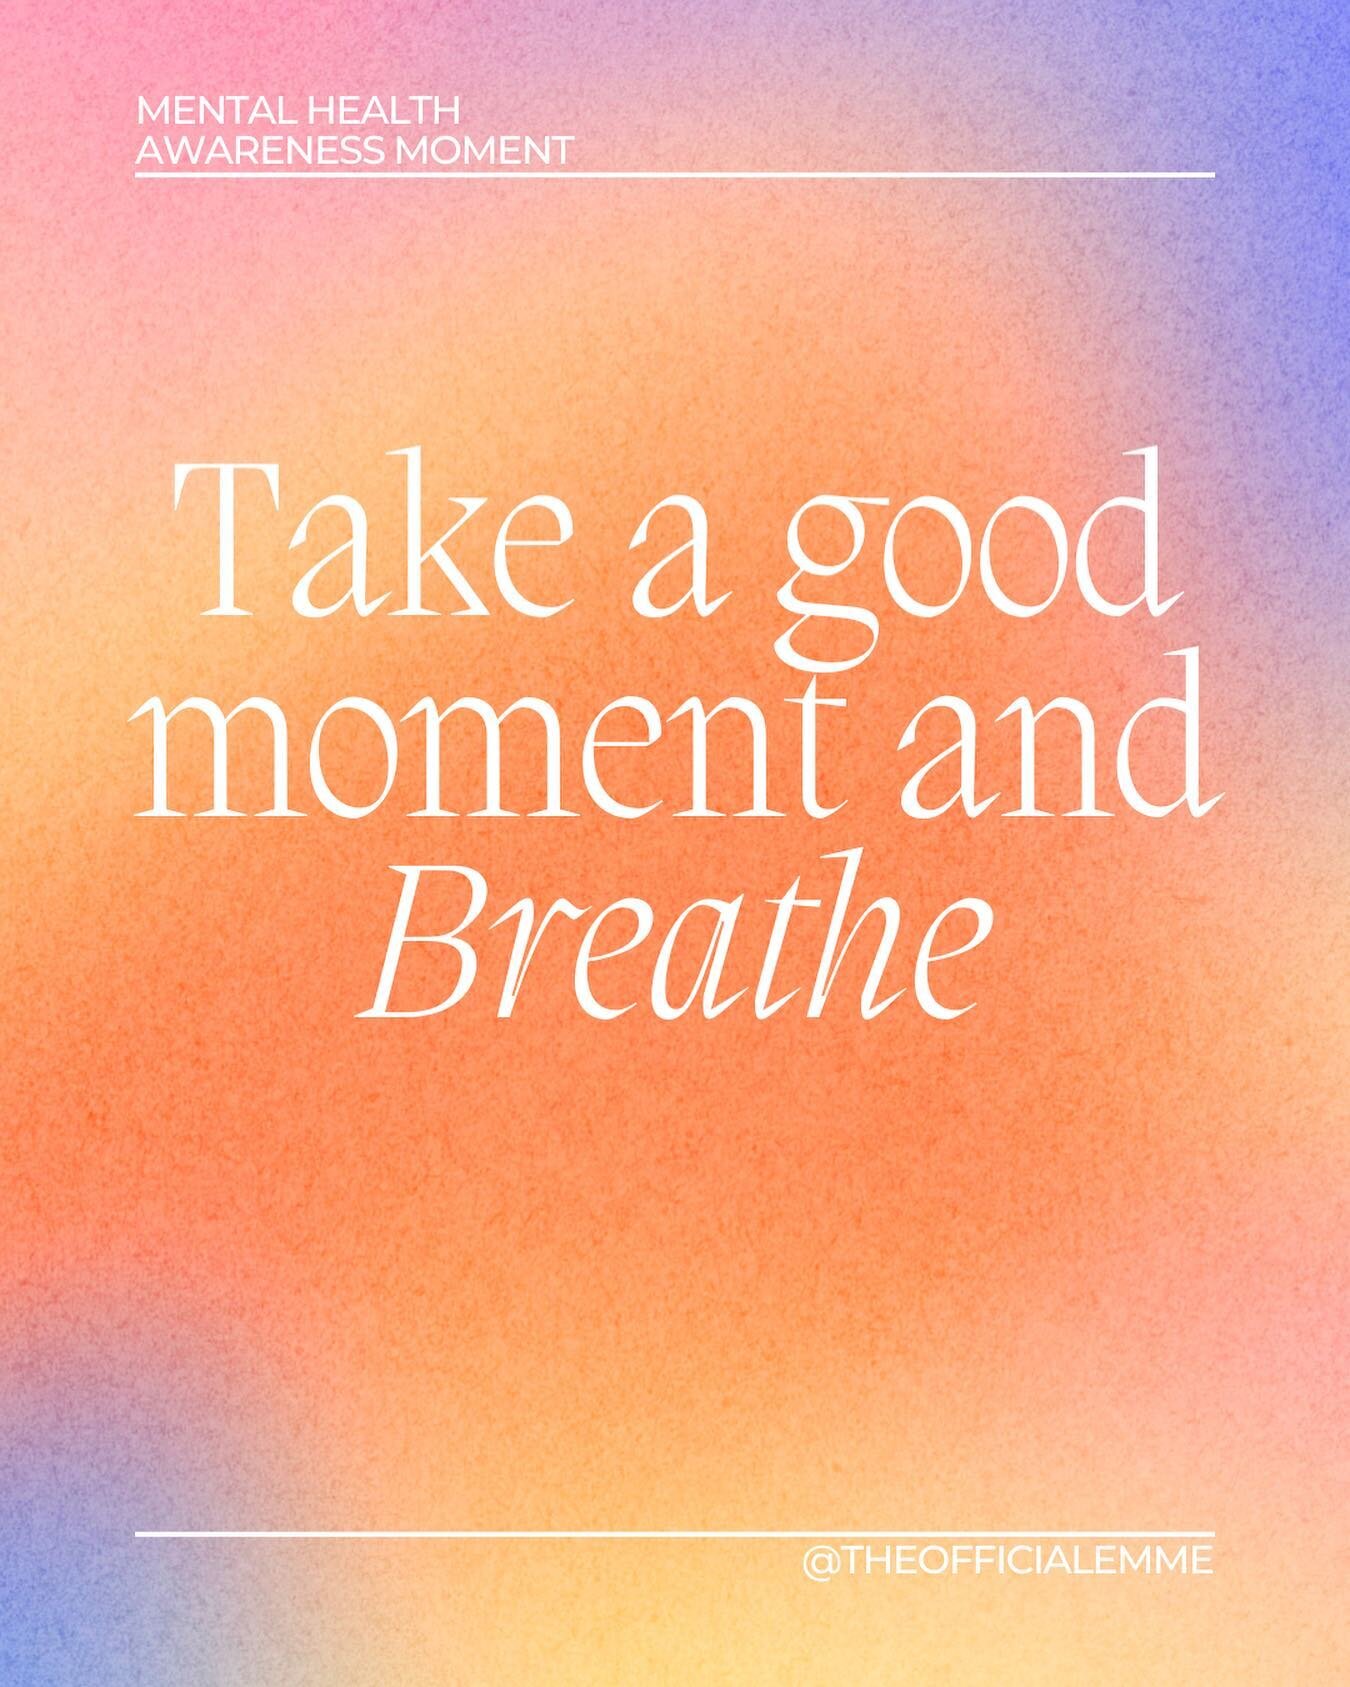 Let&rsquo;s hit the pause button and take a mental health moment by taking 5 cleansing slow breaths together-

✨Back straight
✨Shoulders down and away from your ears,
✨breathe in through the nose (4 beats) 
✨hold (2 seconds)
✨release through your mou